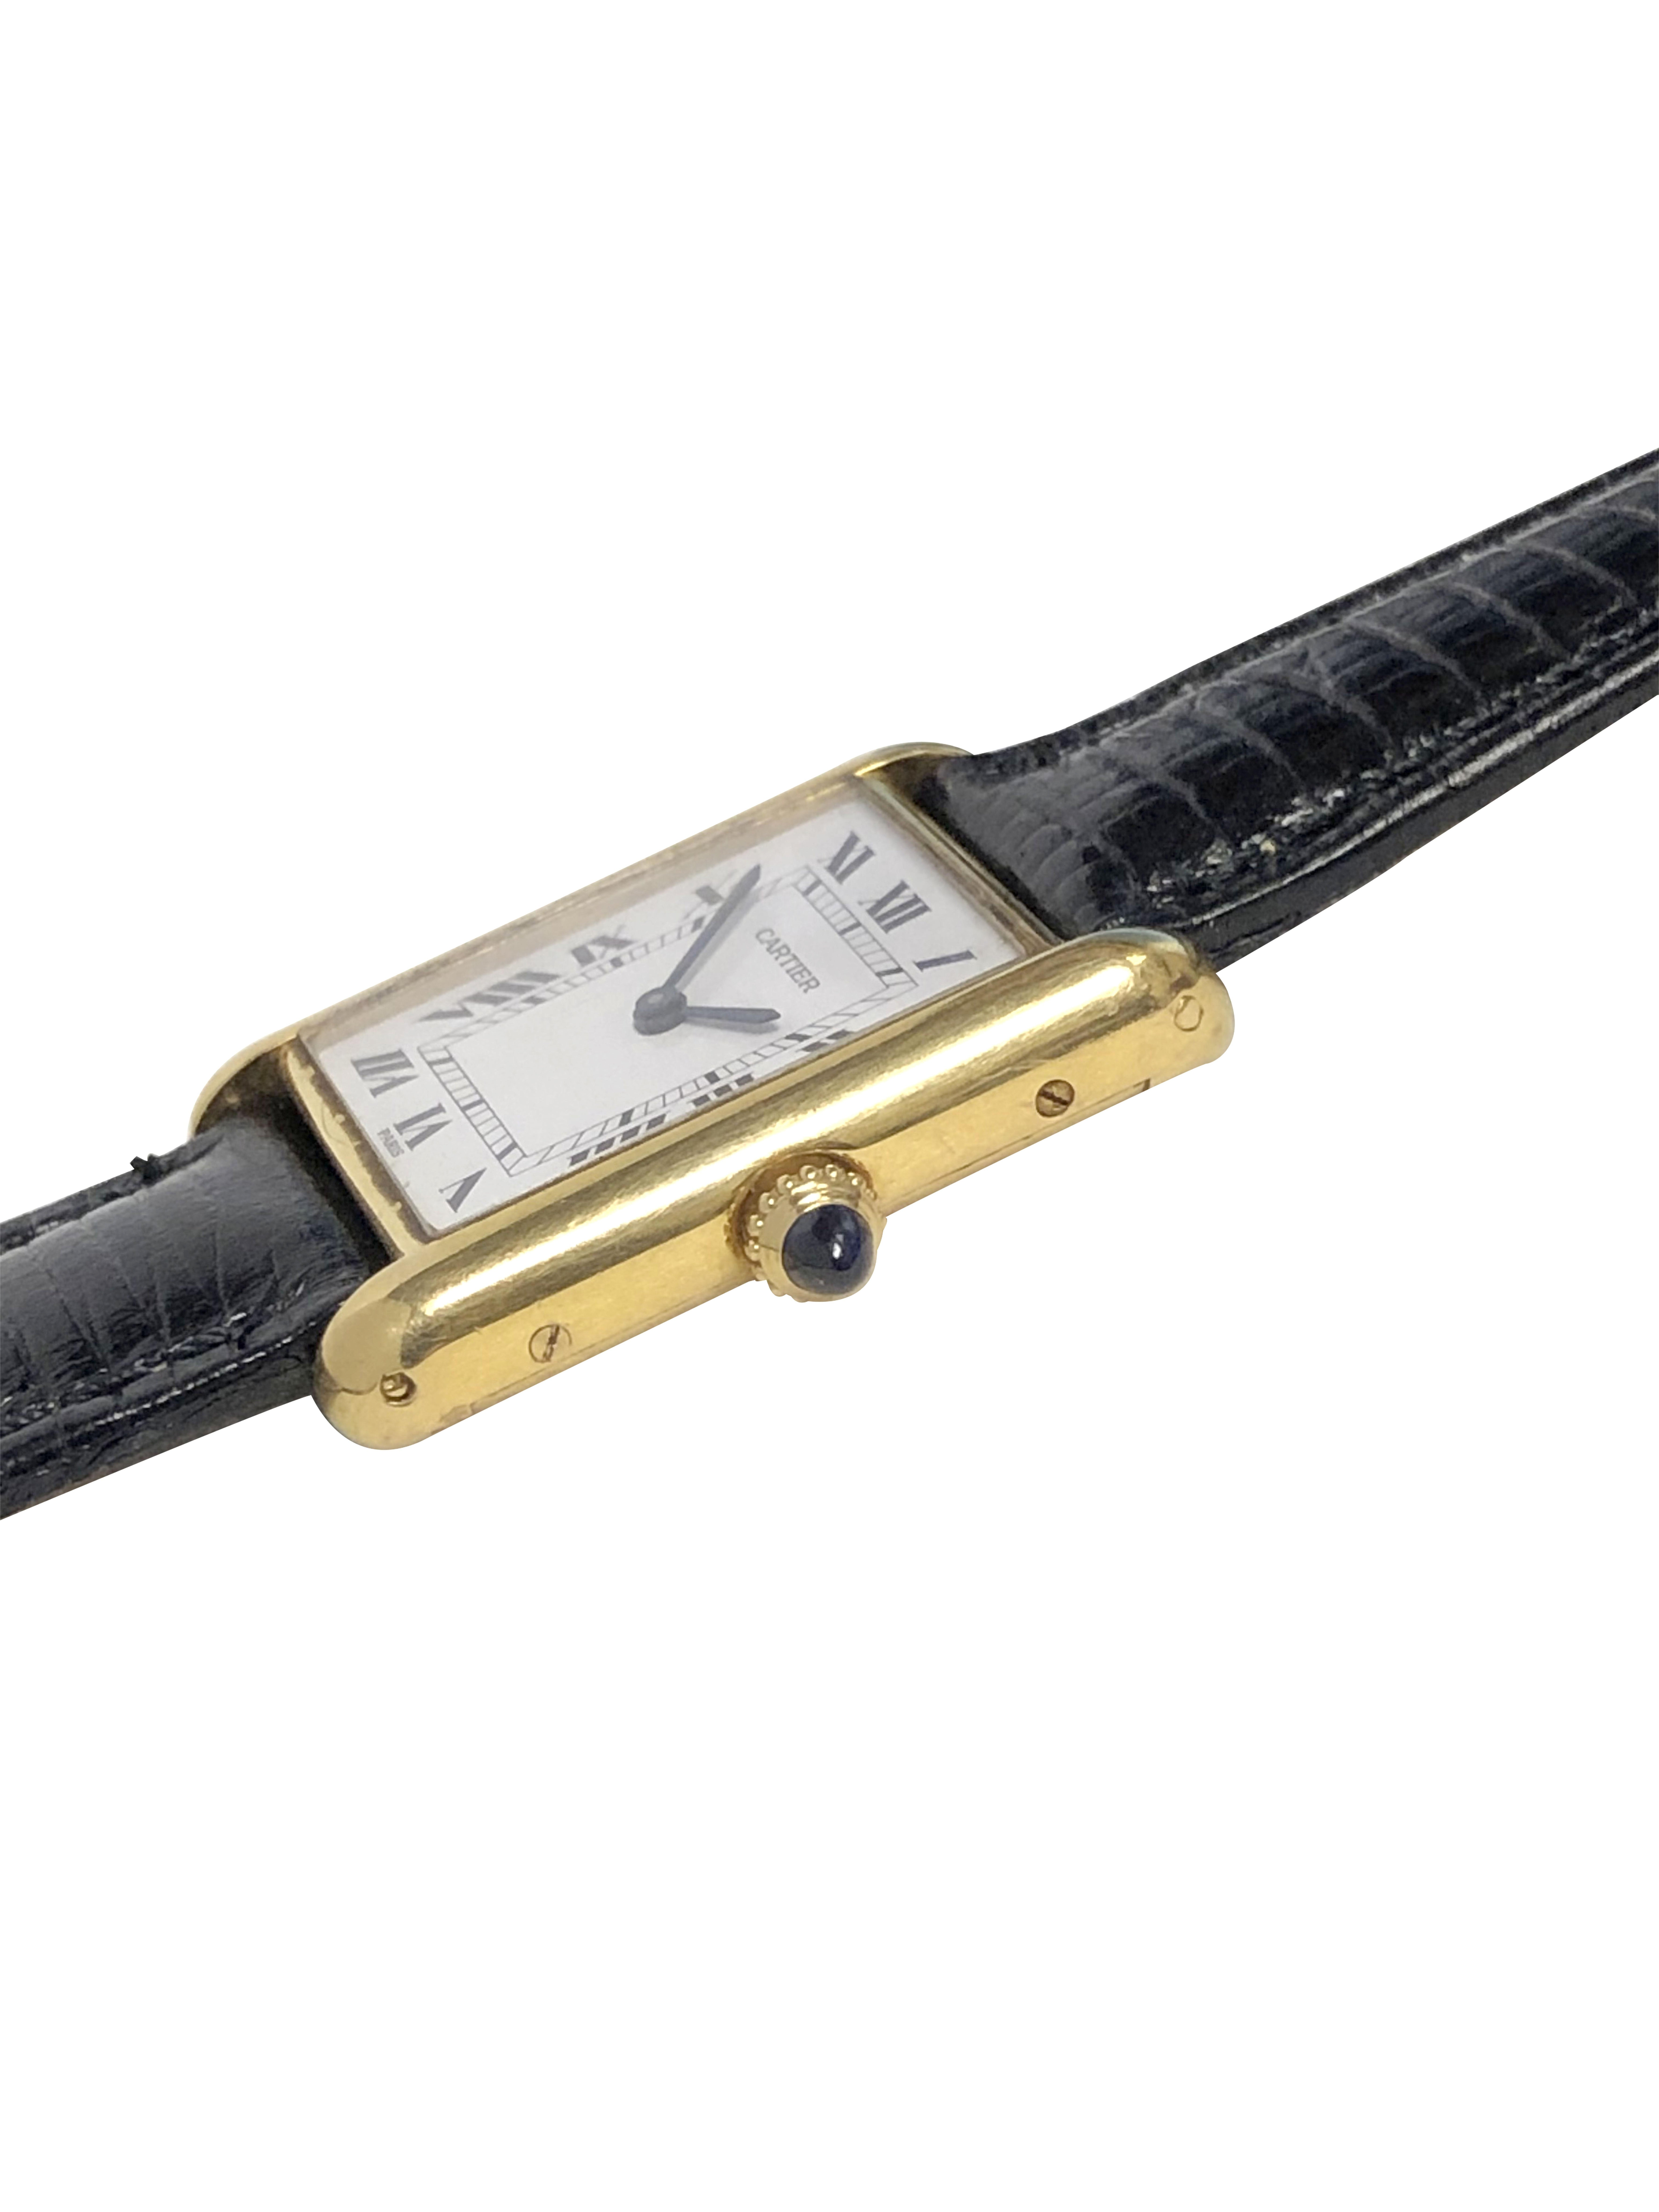 Circa 1970s Cartier Paris Classic tank watch, 30 X 23 MM 2 piece 18K Yellow Gold case, mechanical, manual wind 17 Jewel Cartier movement, White dial with Black Roman Numerals, sapphire Crown. New Hadley Roma padded Black Lizard Grain strap with Gold